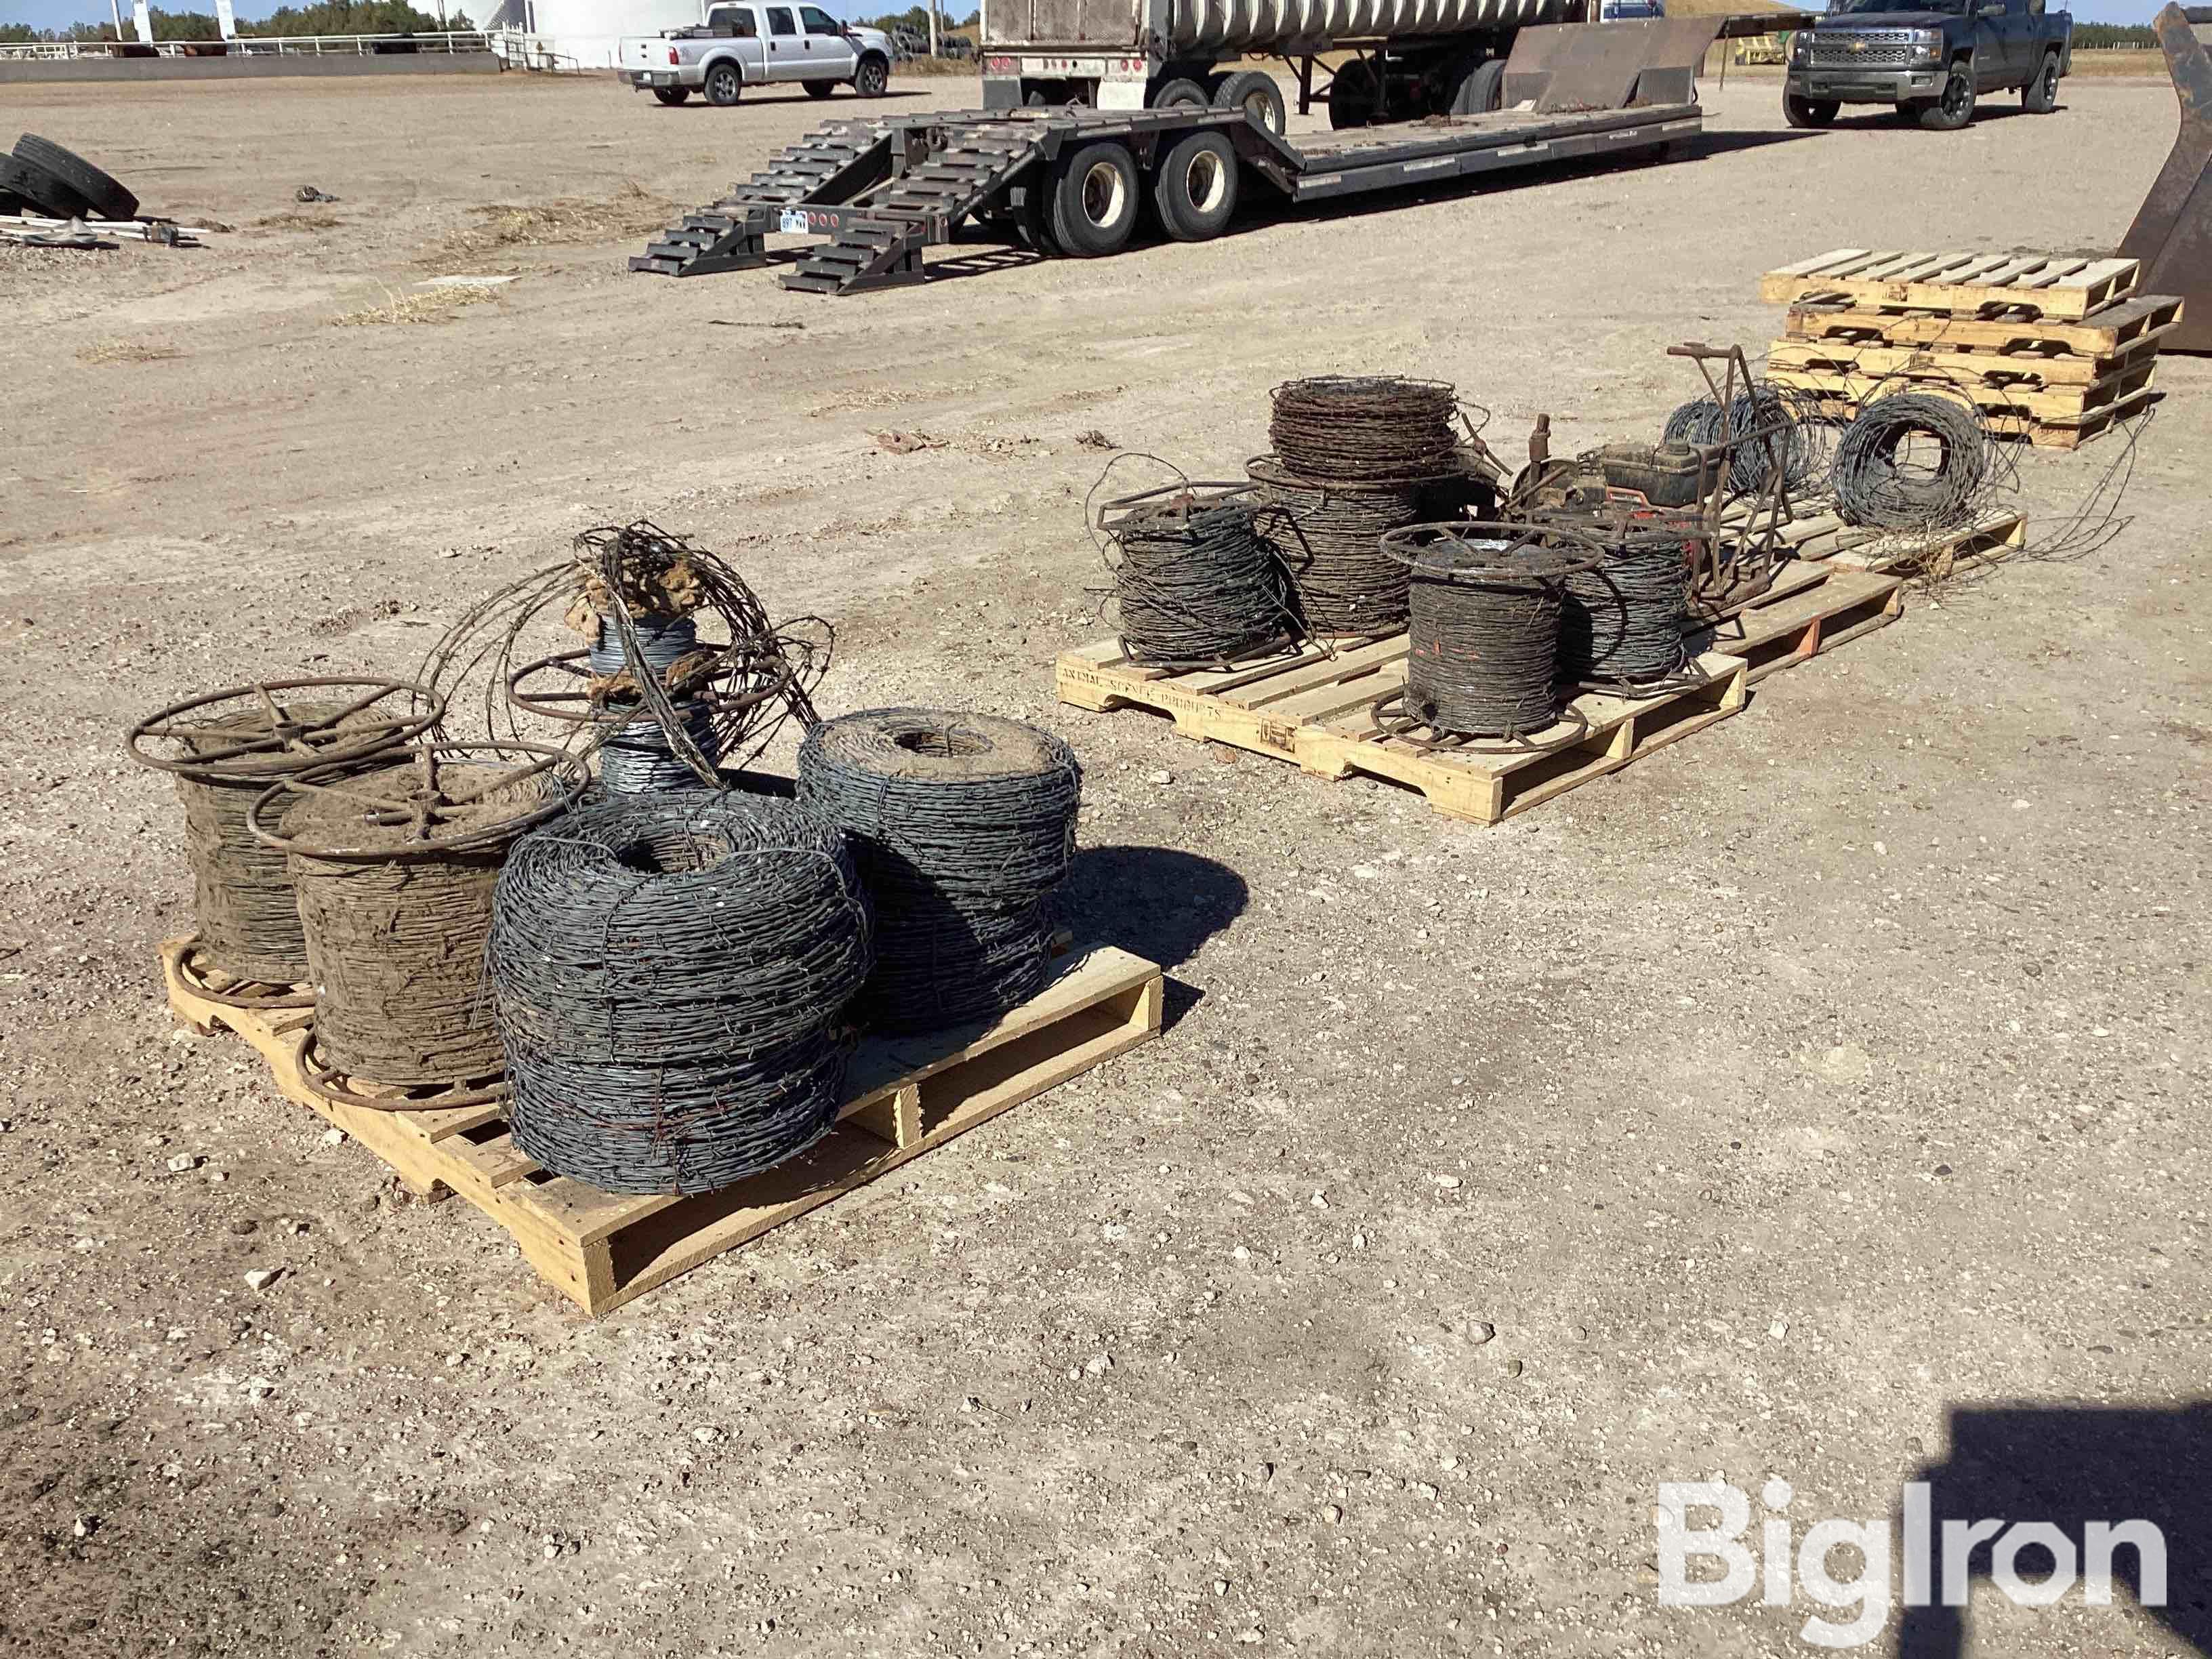 Electric Fence Wire Winder & Electric Fence Wire Spools BigIron Auctions